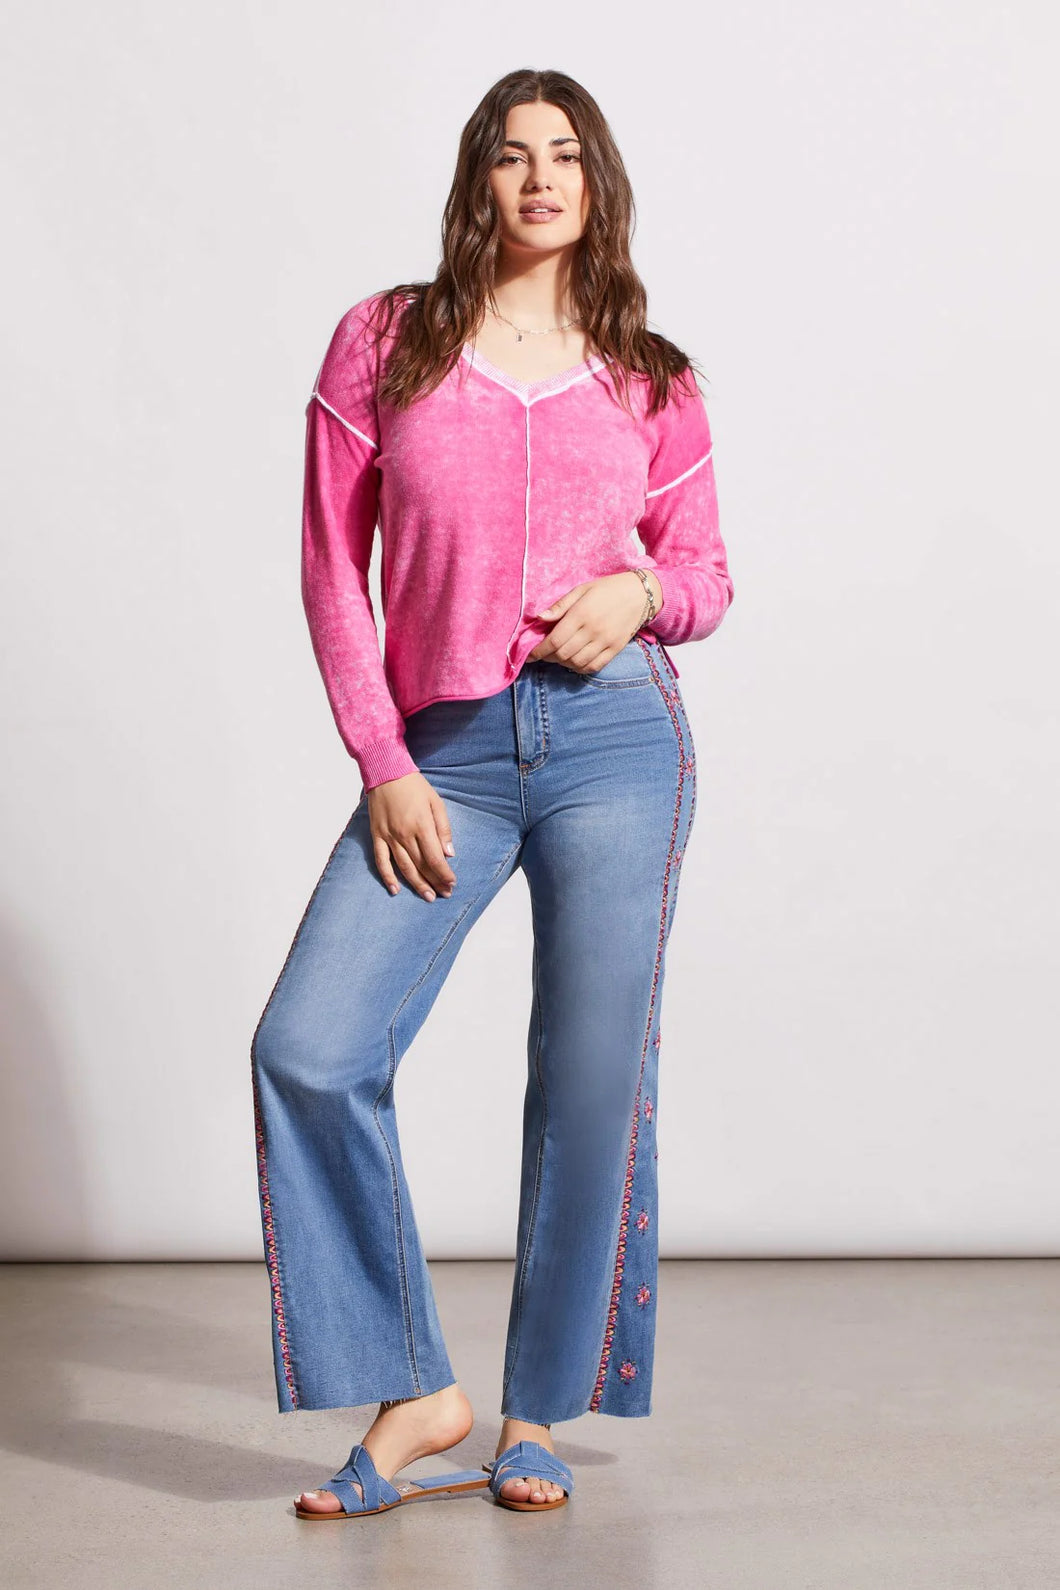 One of our top sellers, this light and adaptable V-neck sweater is a perfect choice for casual, trendy fashion.  Our gorgeous sweater offers a bright pop of pink color, pop-over design and long sleeves with drop shoulders, an exposed center seam, and a high-low hem with side-slit details.  Color - Hi pink. Pop-over v-neck. Long sleeve with drop shoulder Exposed center seam; high-low hem with side slits Special reverse bleach print Fabric - 100% Cotton.